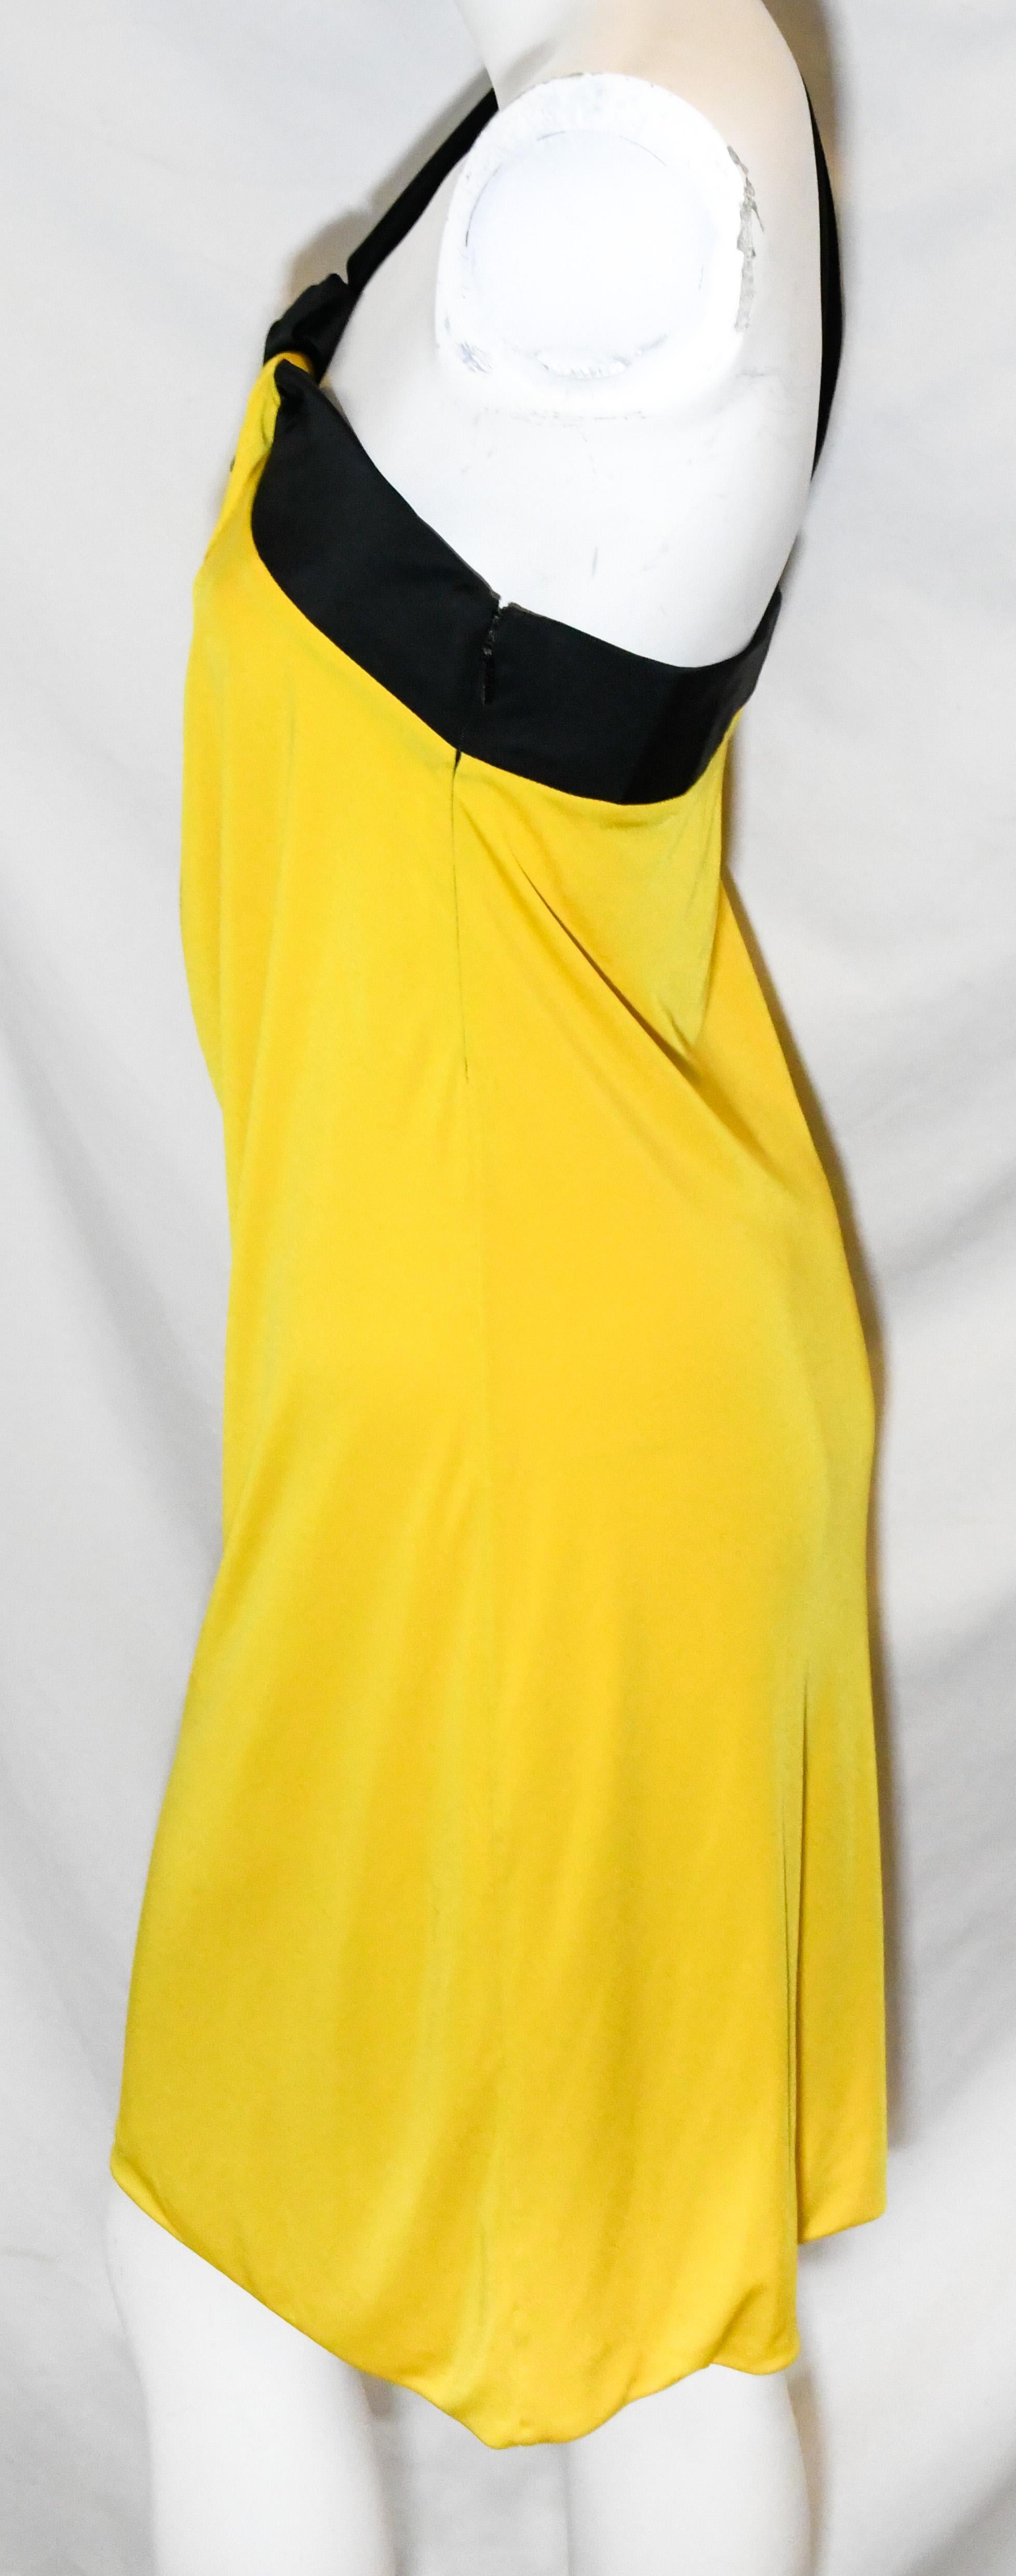 Gucci yellow and black one shoulder wide strap cocktail dress lined in yellow silk.  Dress is decorated with black band across the bust and up one shoulder.  The dress is softly gathered at front.  The dress includes a long zipper, at back, for